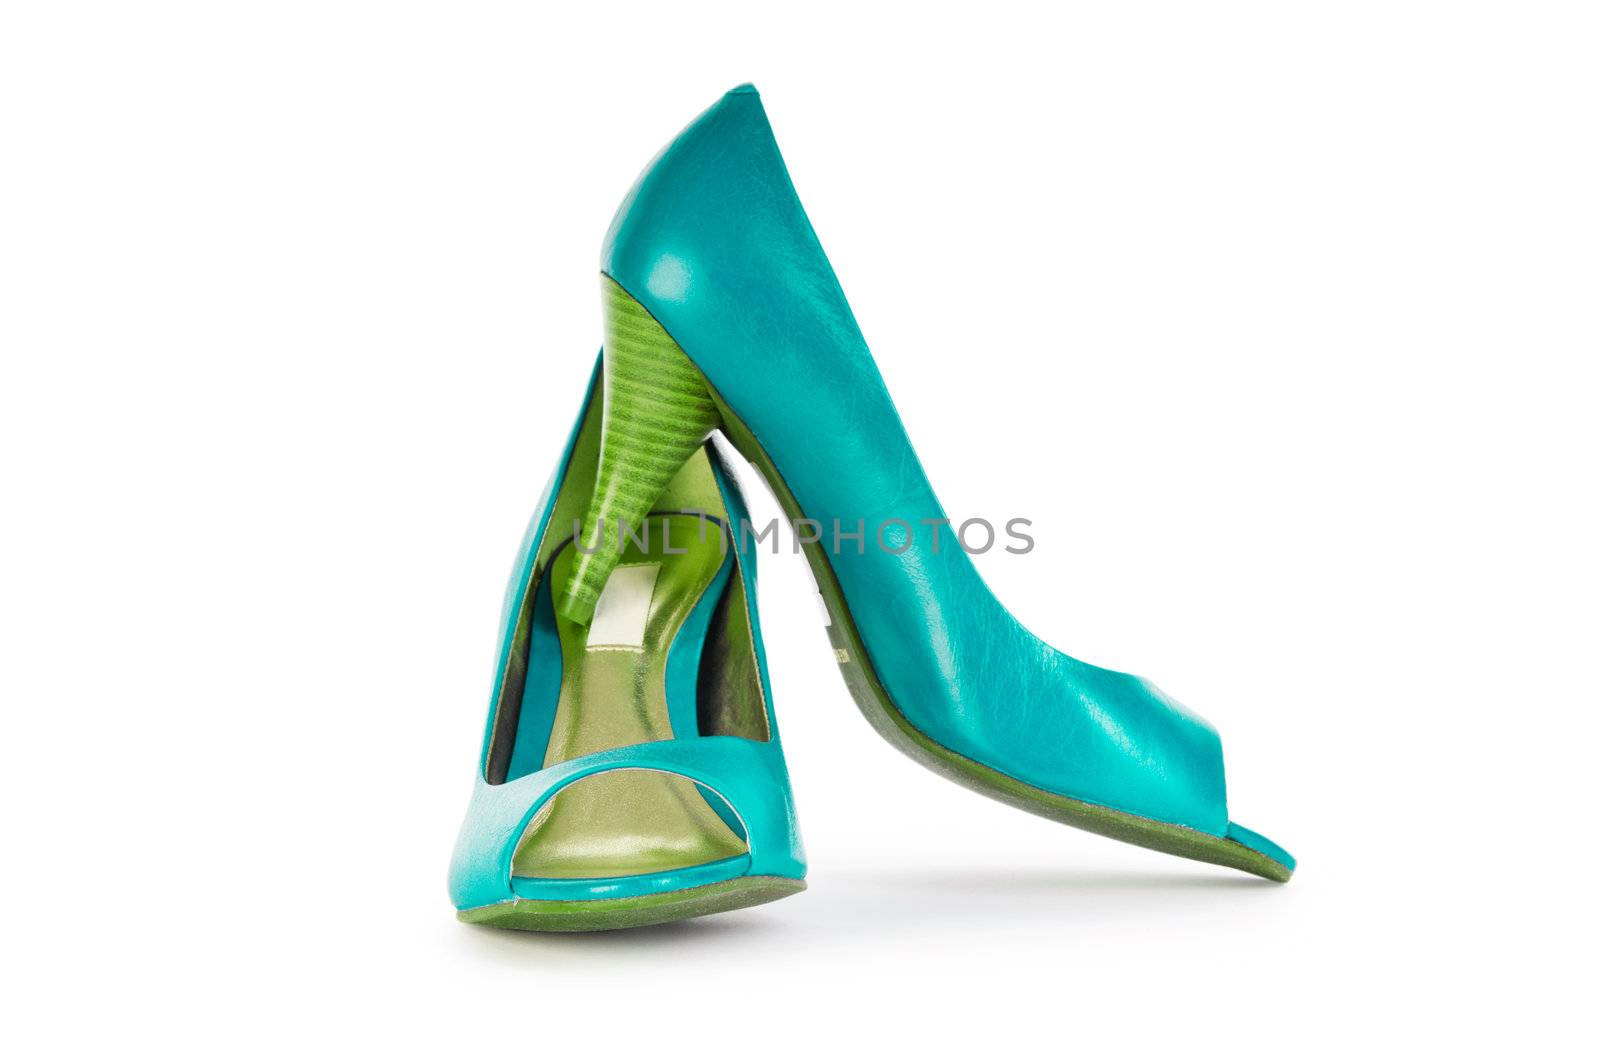 Female shoes in fashion concept by Elnur